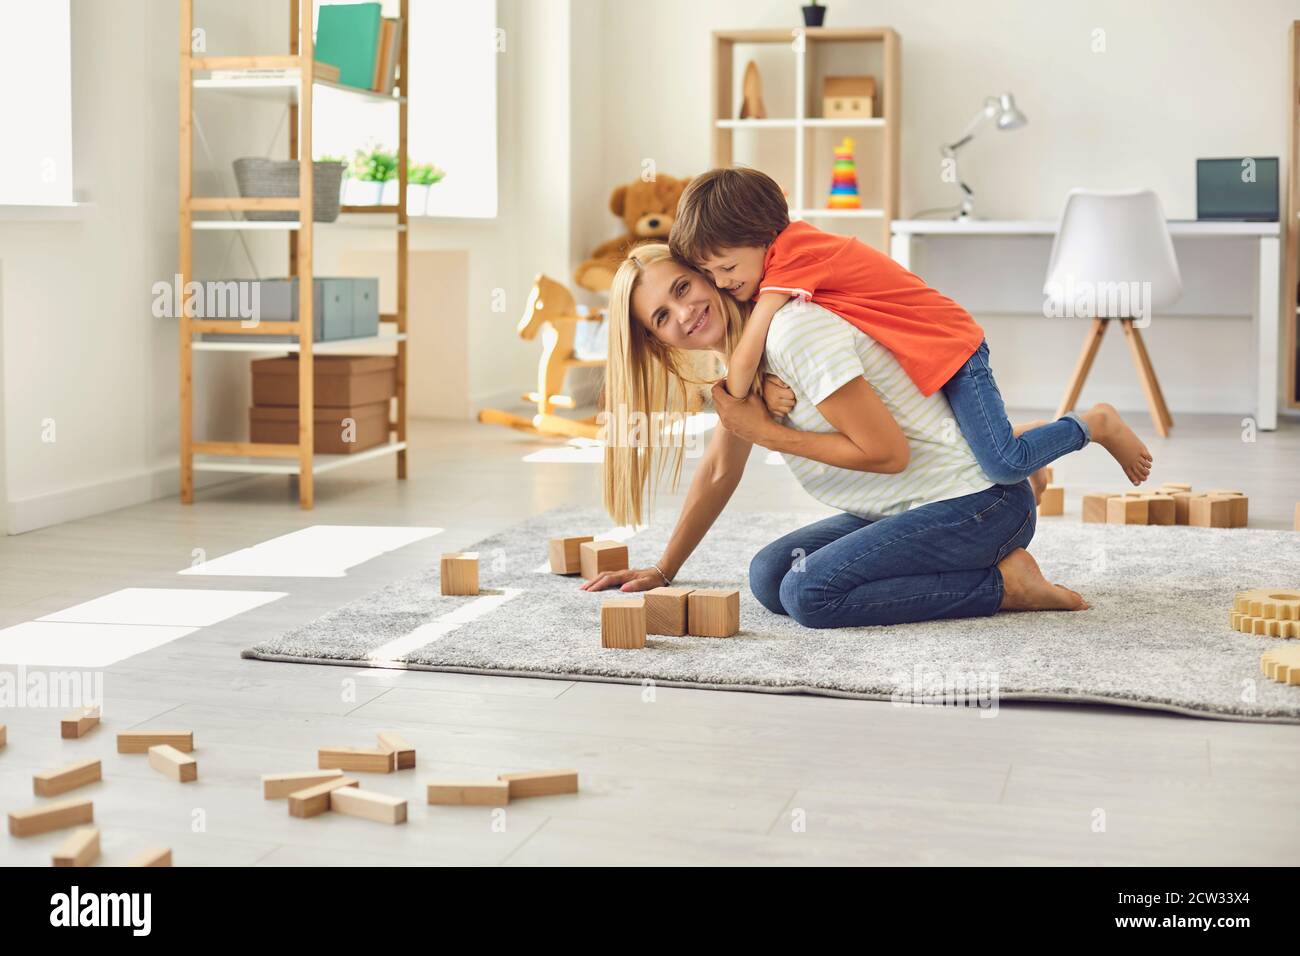 Preschool child embracing his young mommy from behind while having fun together at home Stock Photo